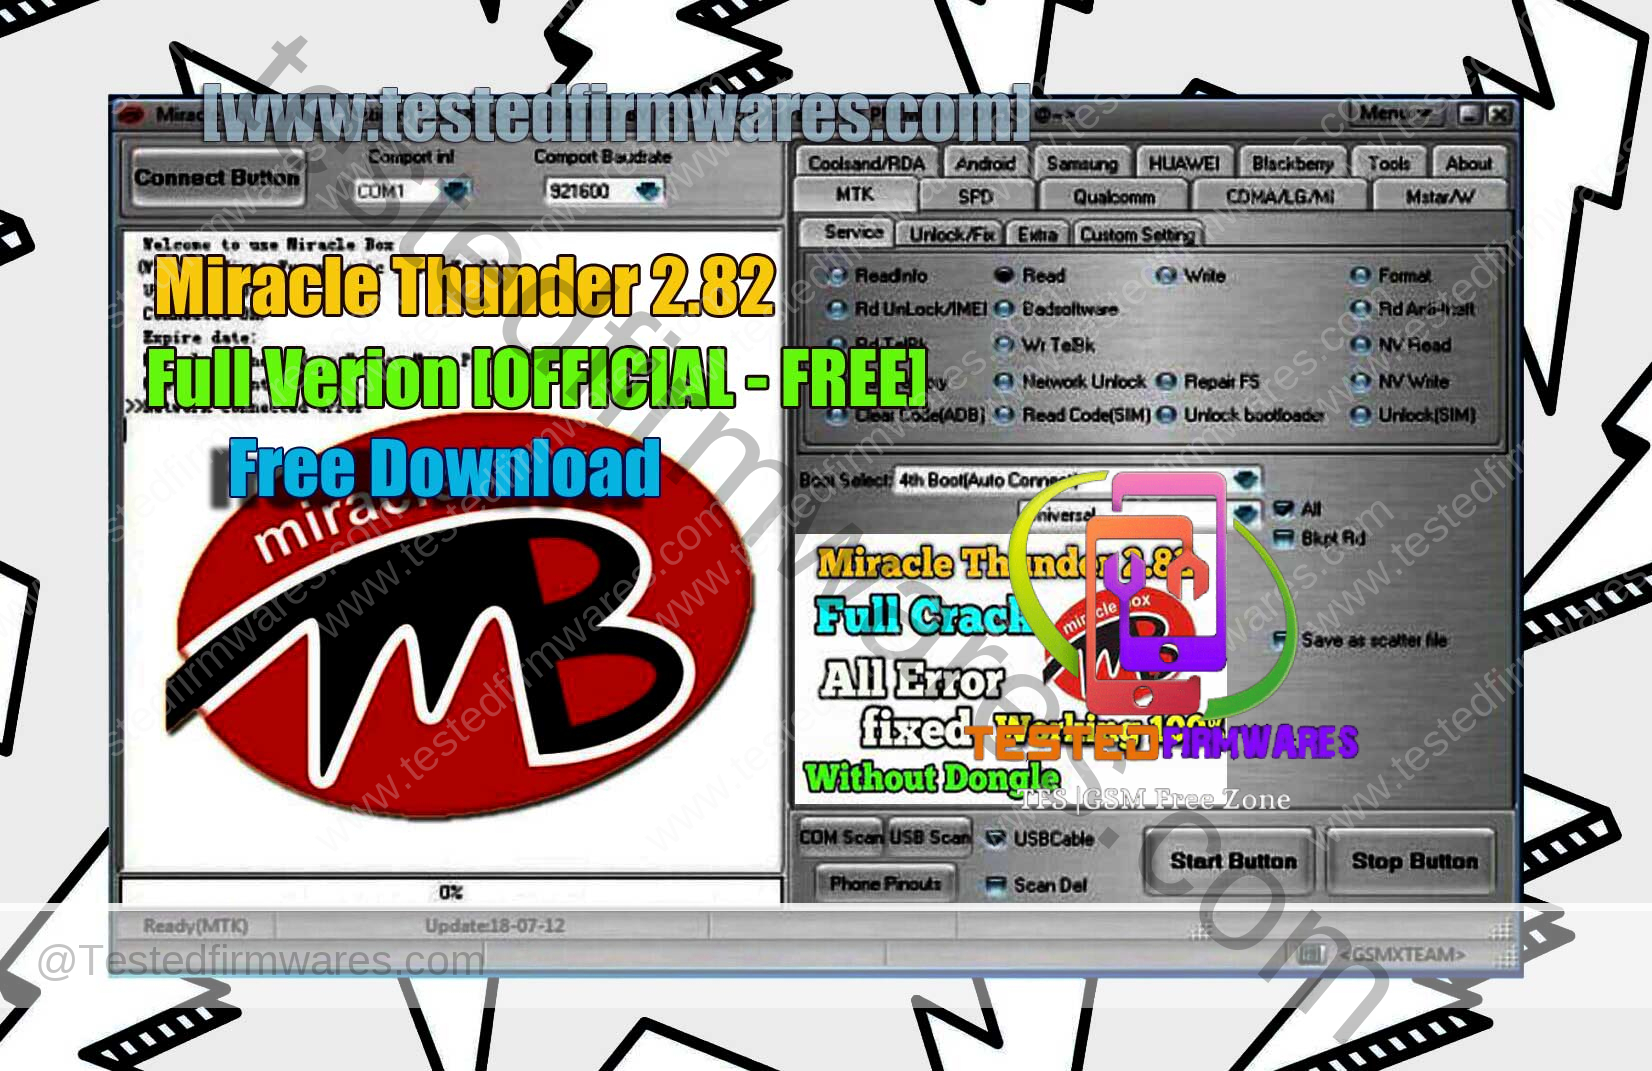 Miracle Thunder 2.82 Full Verion [OFFICIAL - FREE] Setup Uploaded By[www.testedfirmwares.com]